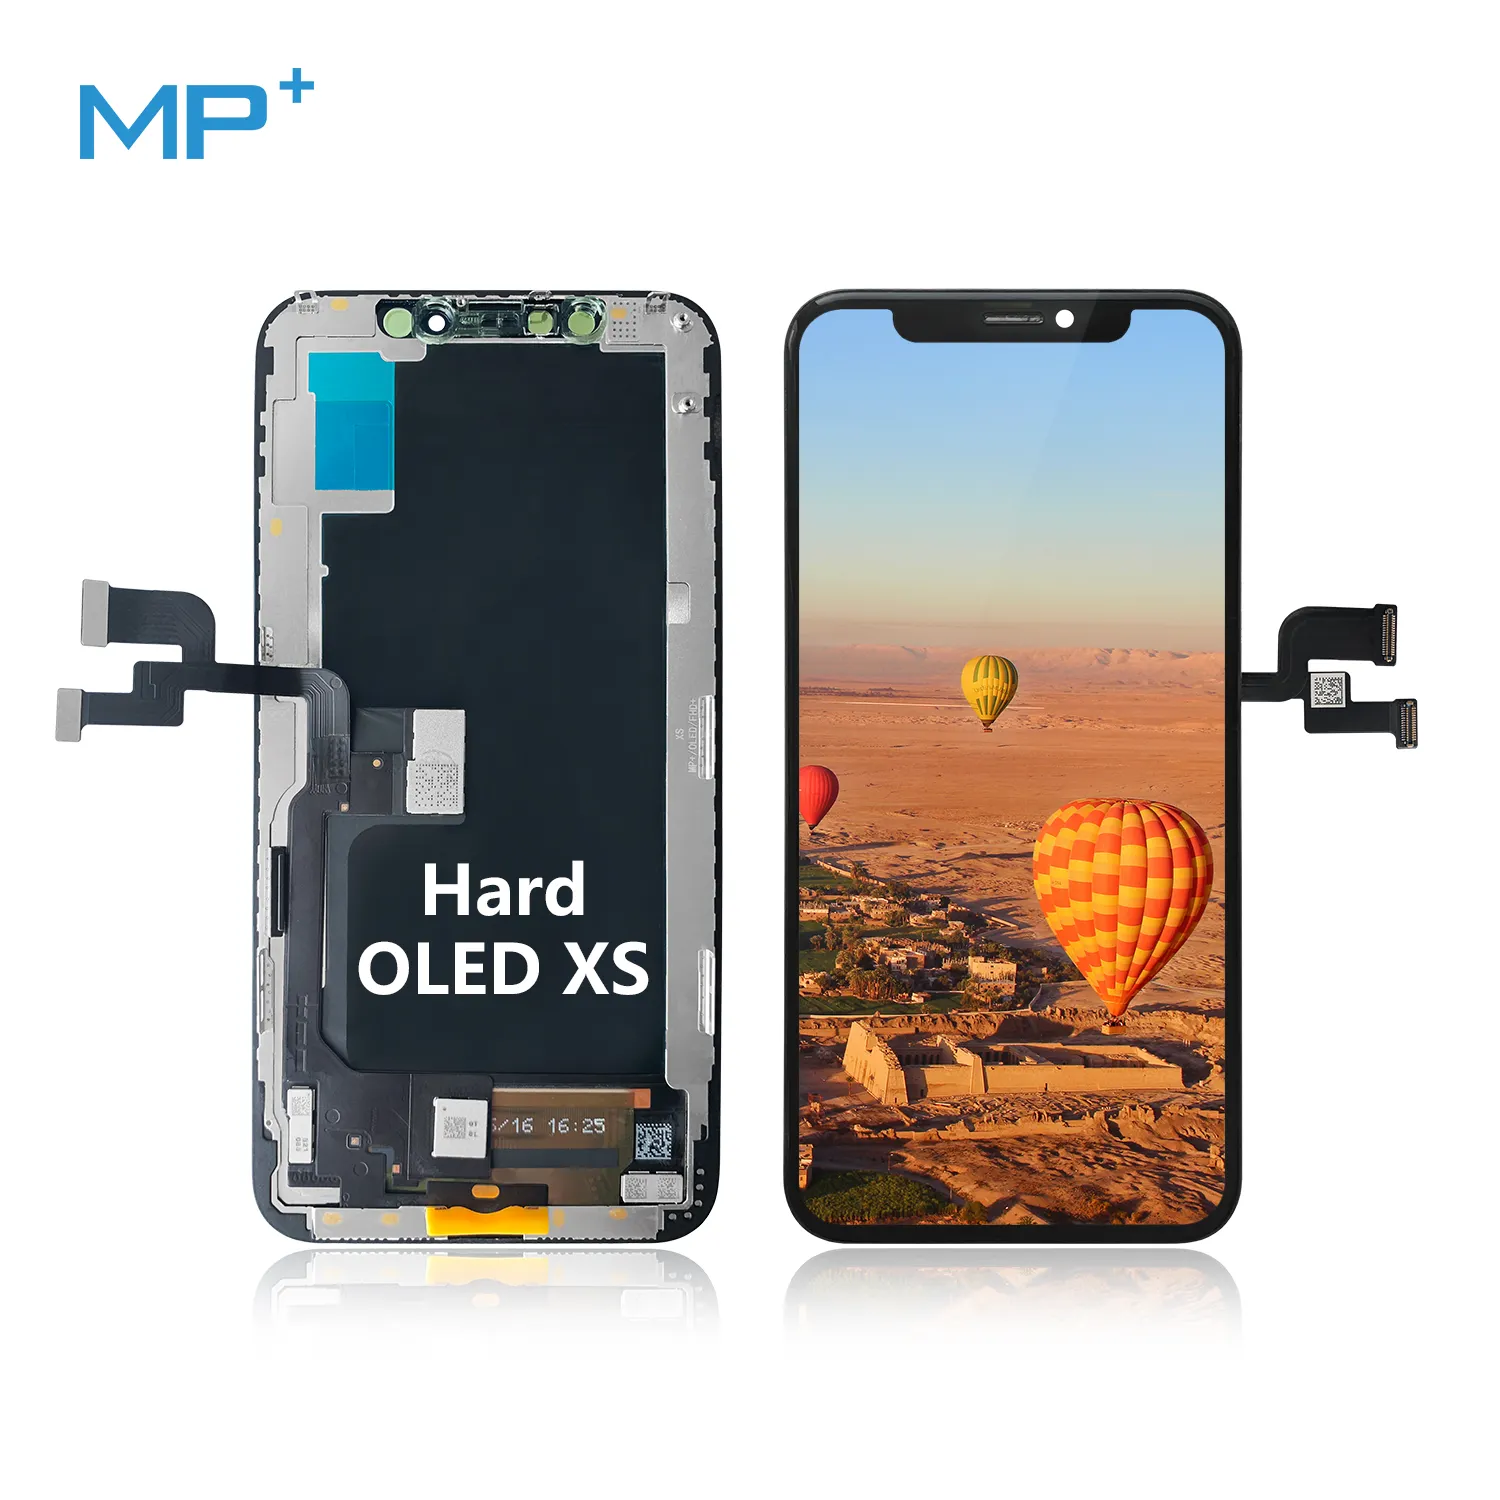 Manufacturer MP+ 5.8 inches OLED Display for iPhone XS Accessories Mobile Phone Lcd Cell Phone Screen